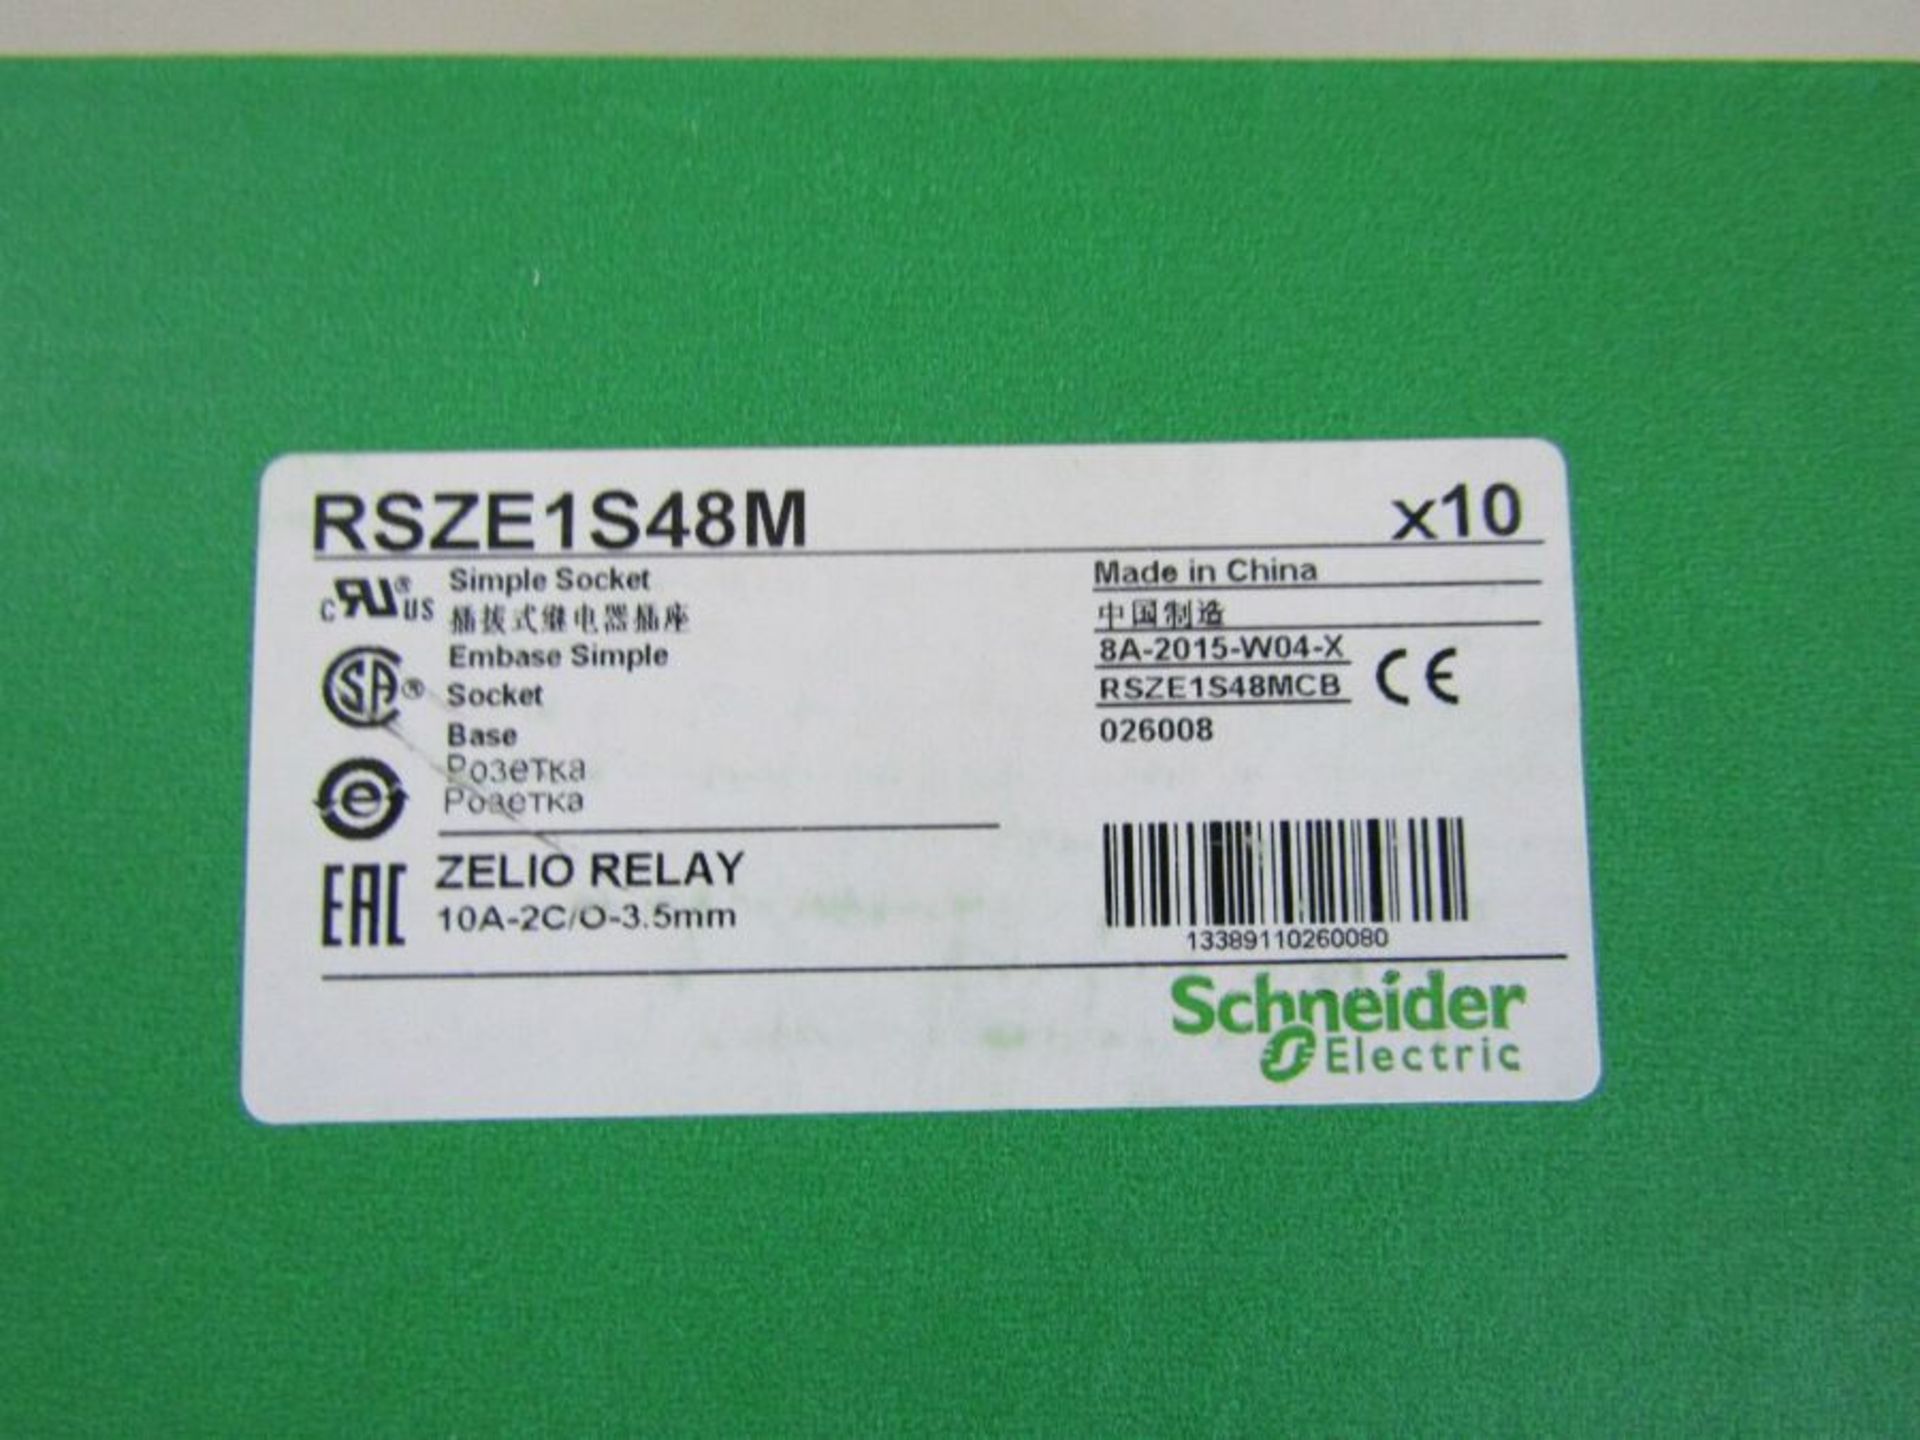 200 x SCHNEIDER RSZE1S48M Relay Socket for RSB Series - S2 - 8497667 - Image 2 of 2